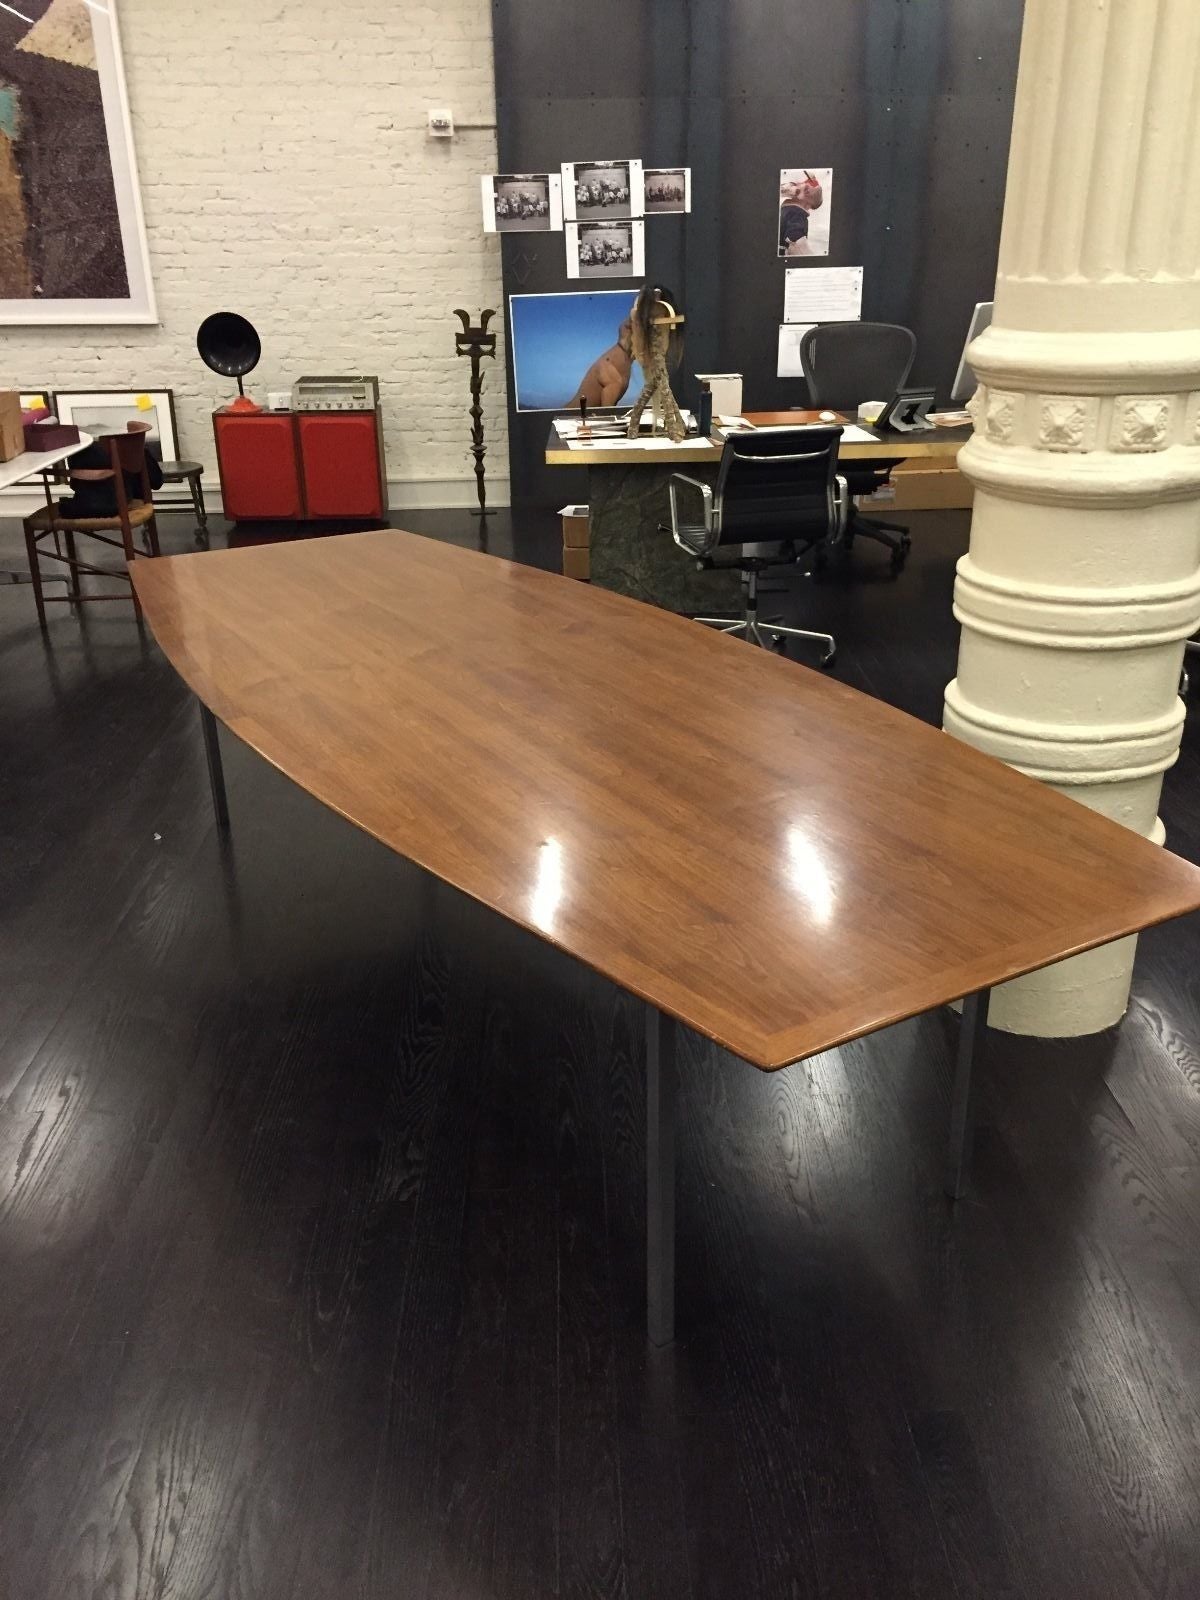 Walnut Boat Table designed by Florence Knoll for Knoll International

117